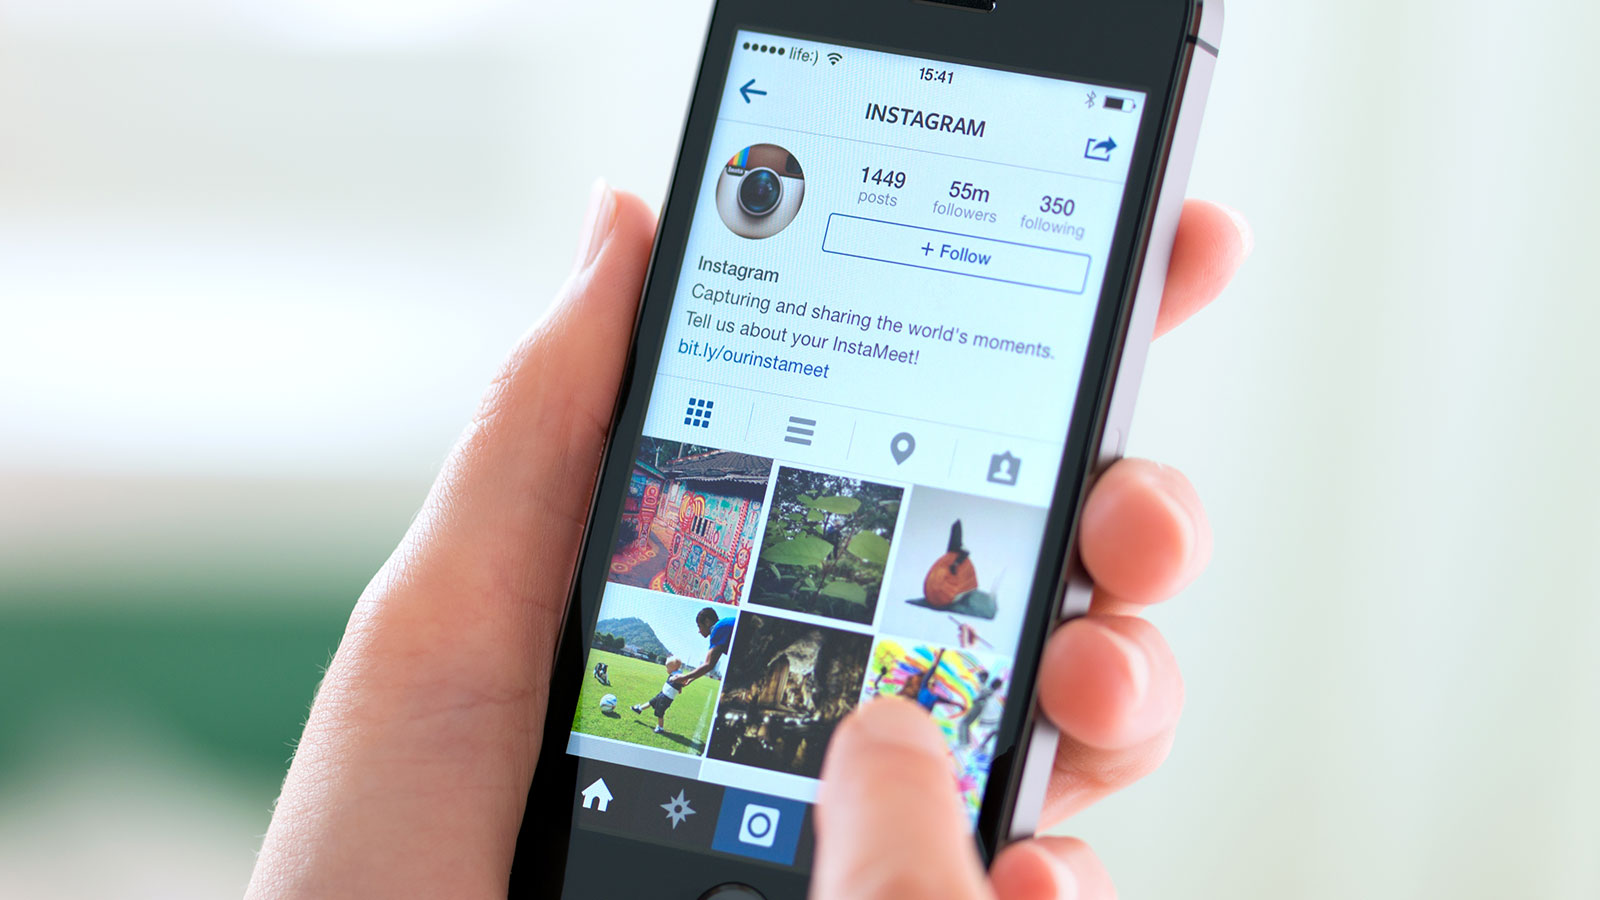 Instagram on an iPhone